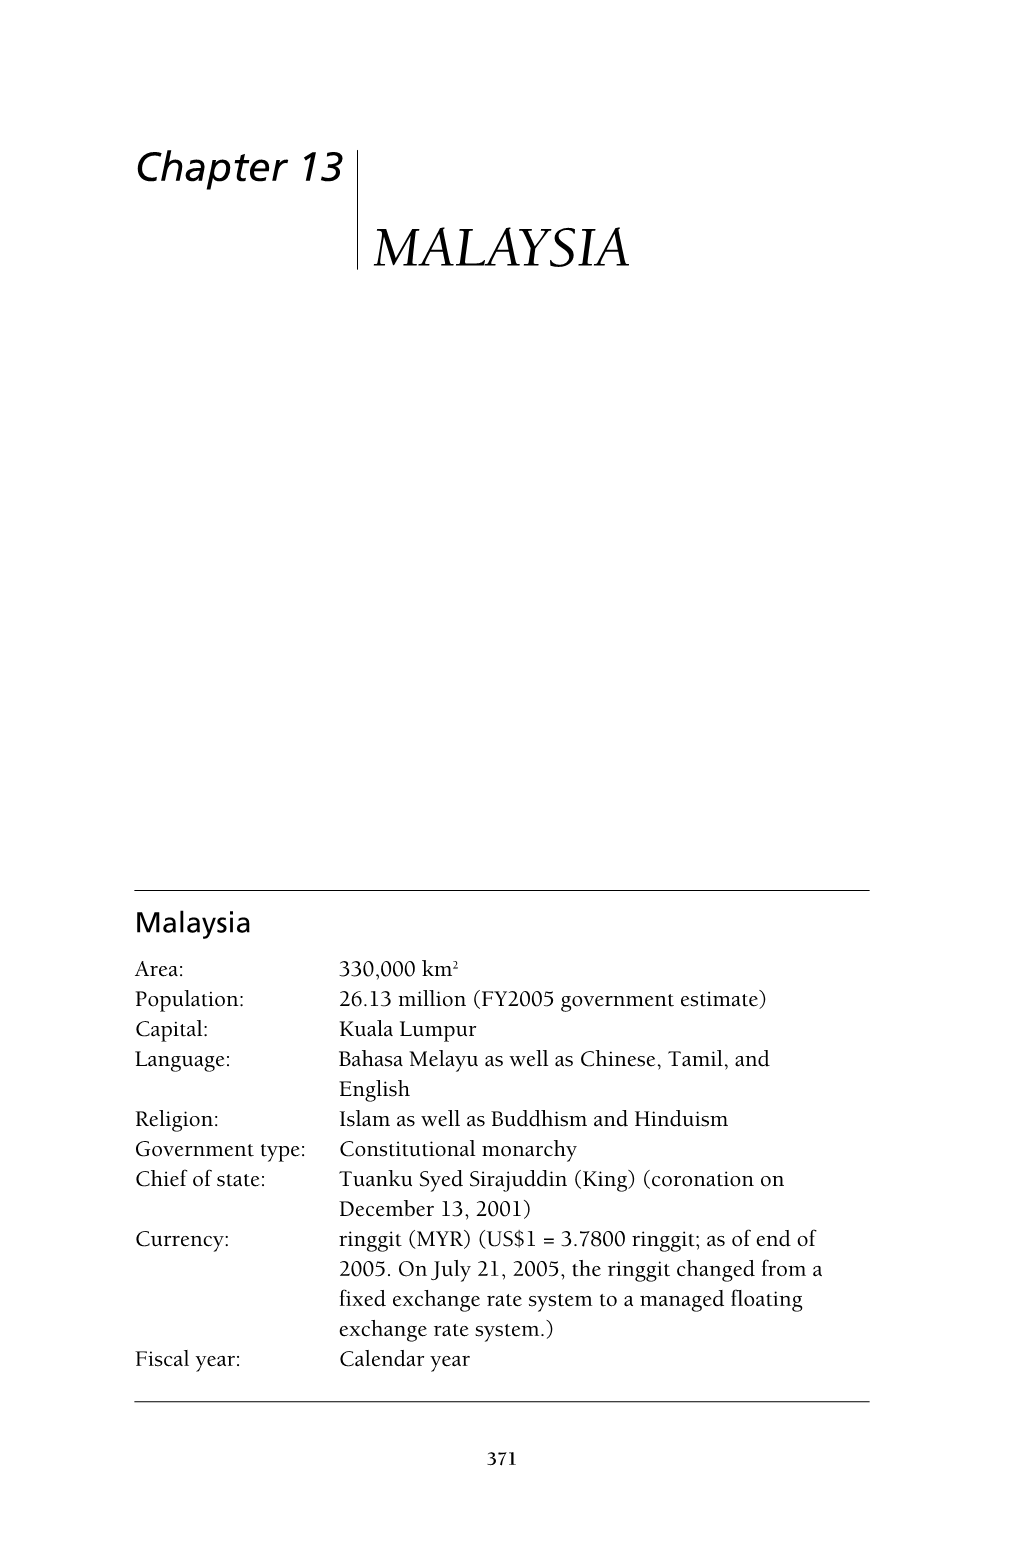 Chapter 13-Malaysia Long Journey to Structural Reform